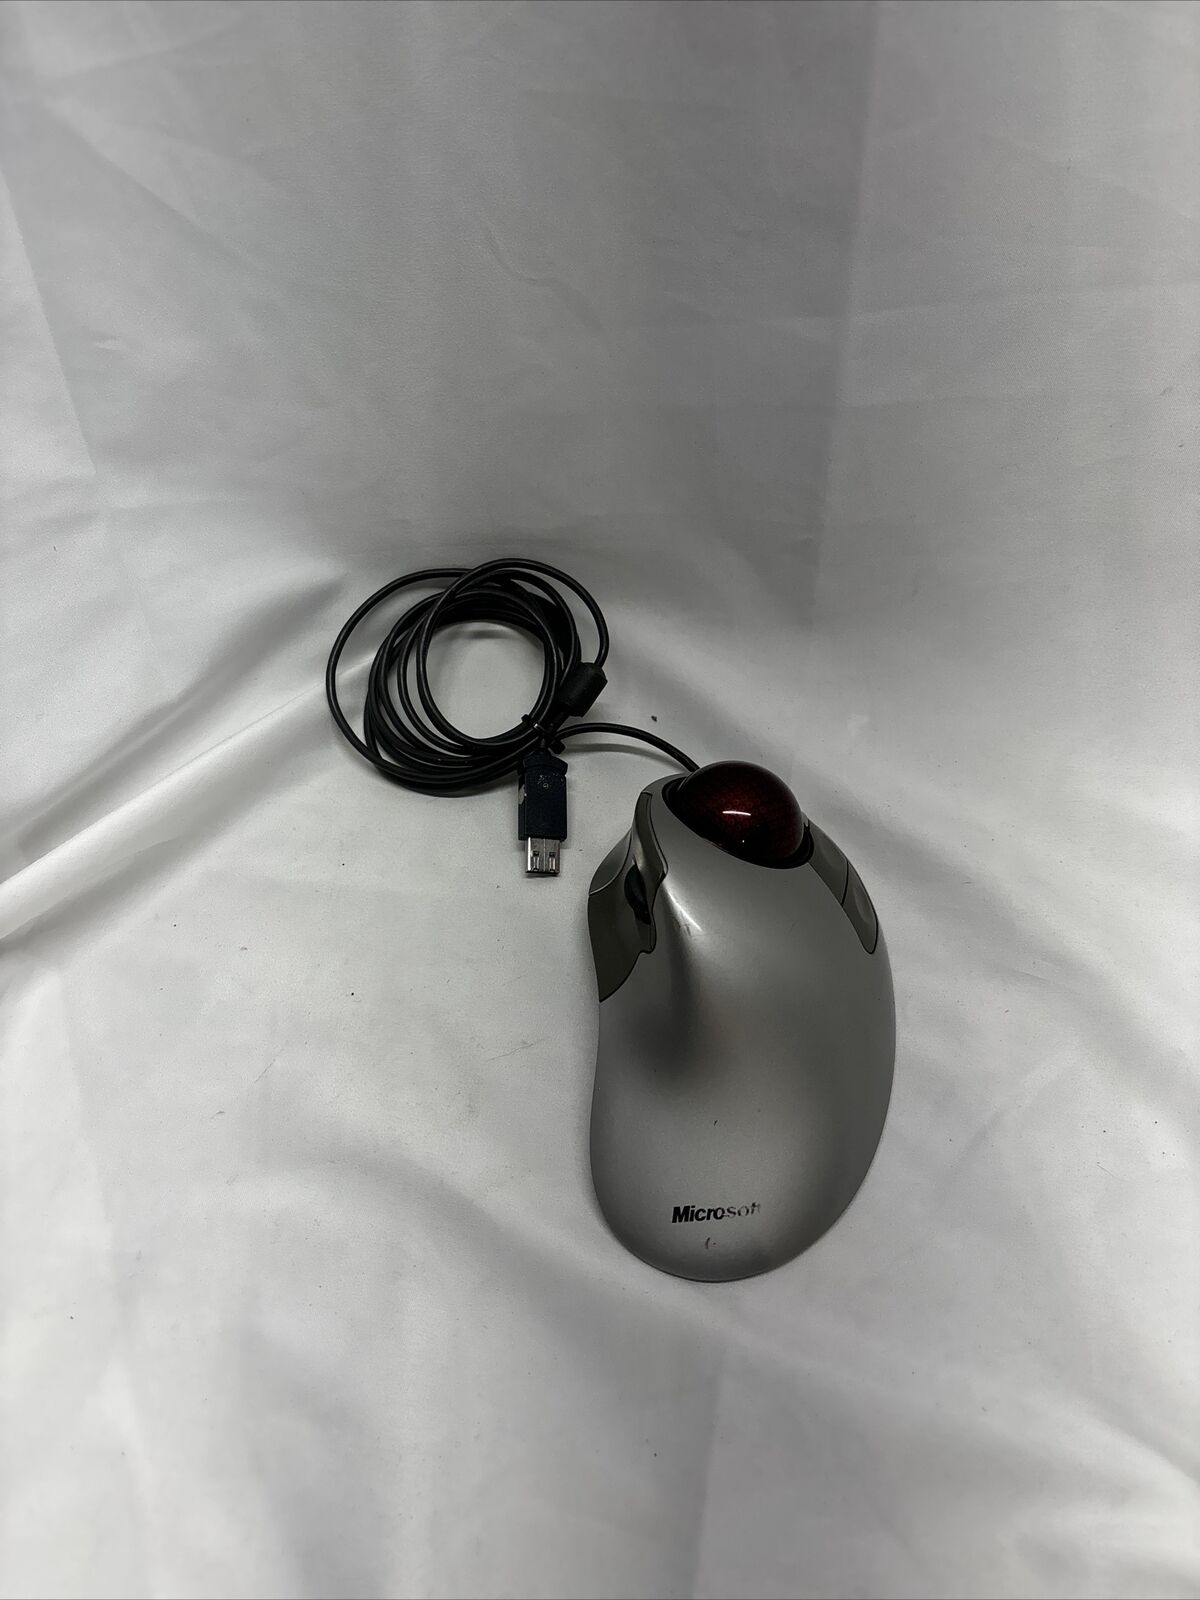 Microsoft Trackball Explorer 1.0 Mouse PS2/USB Compatible X08-16056 - Tested